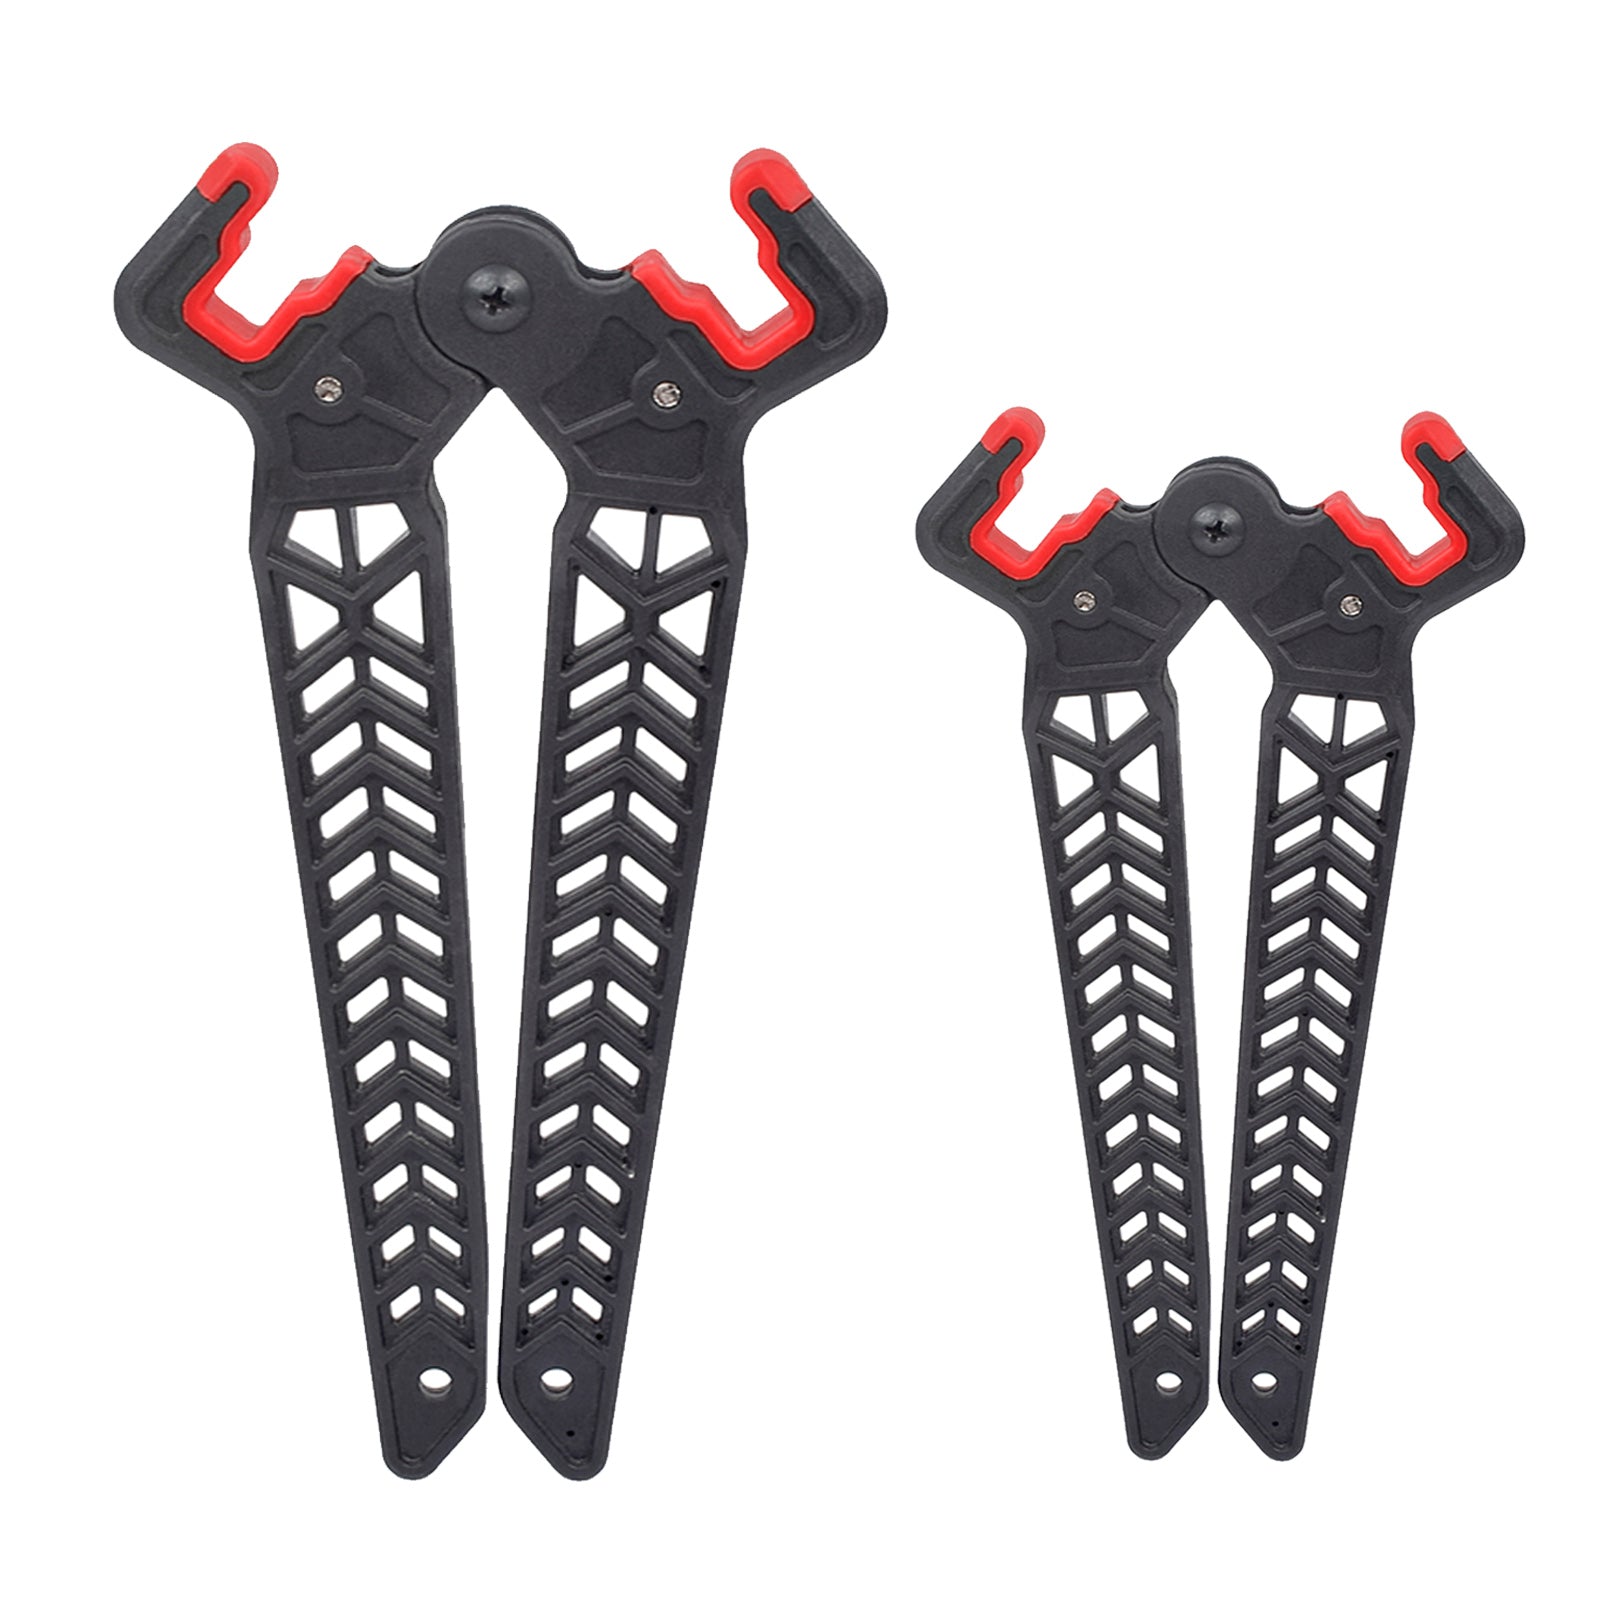 18/22CM Archery Bow Kick Stand Legs 3D for Compound Bow